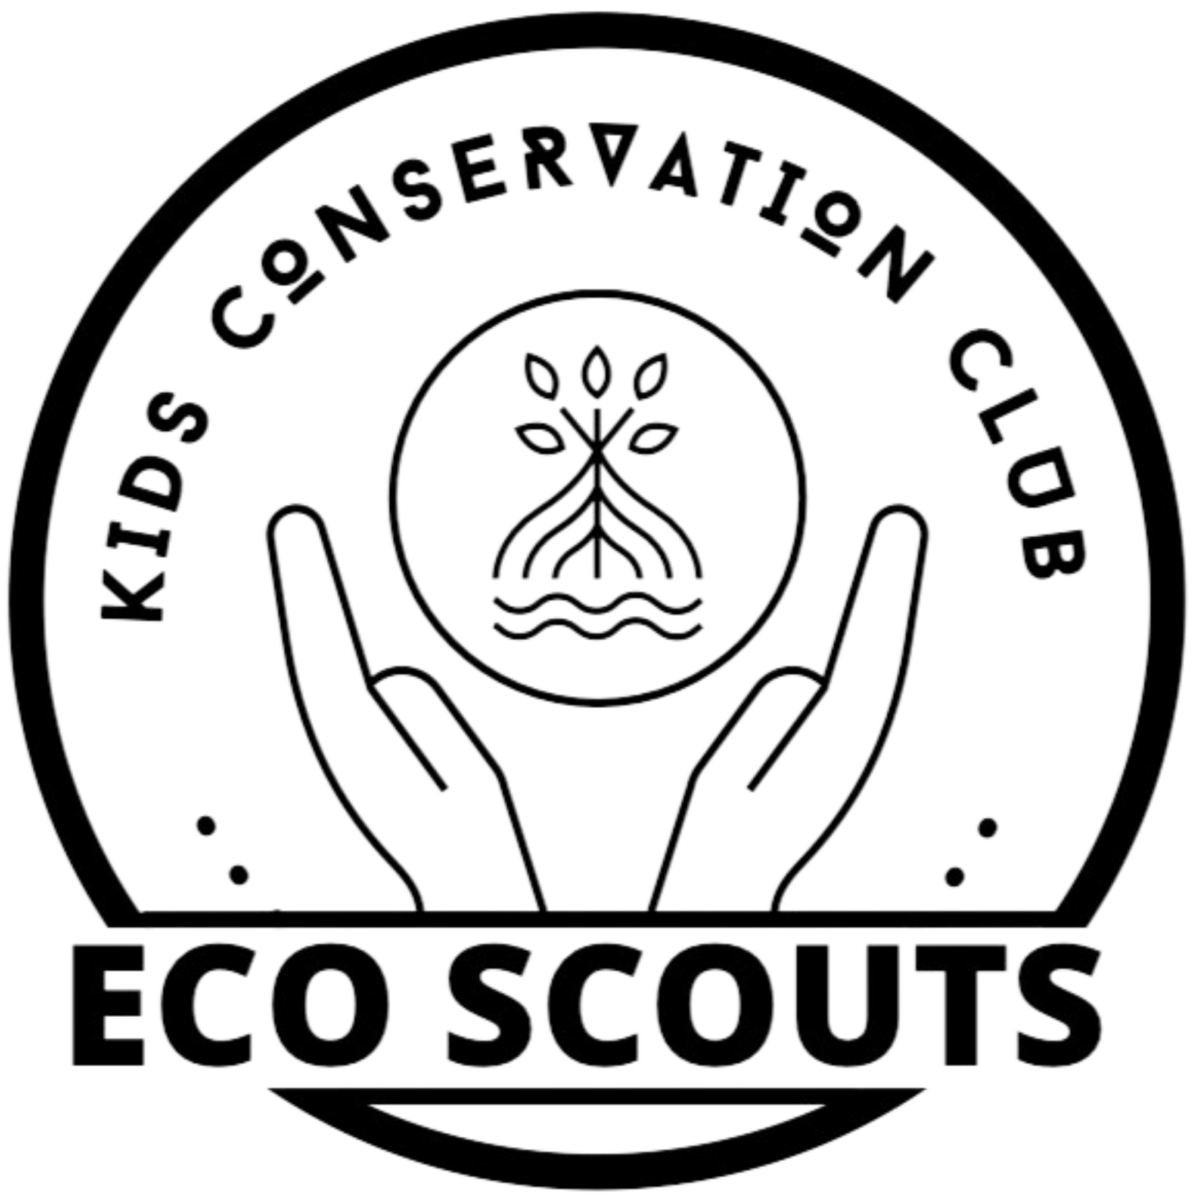 Kids Conservation Club - Eco Scouts logo